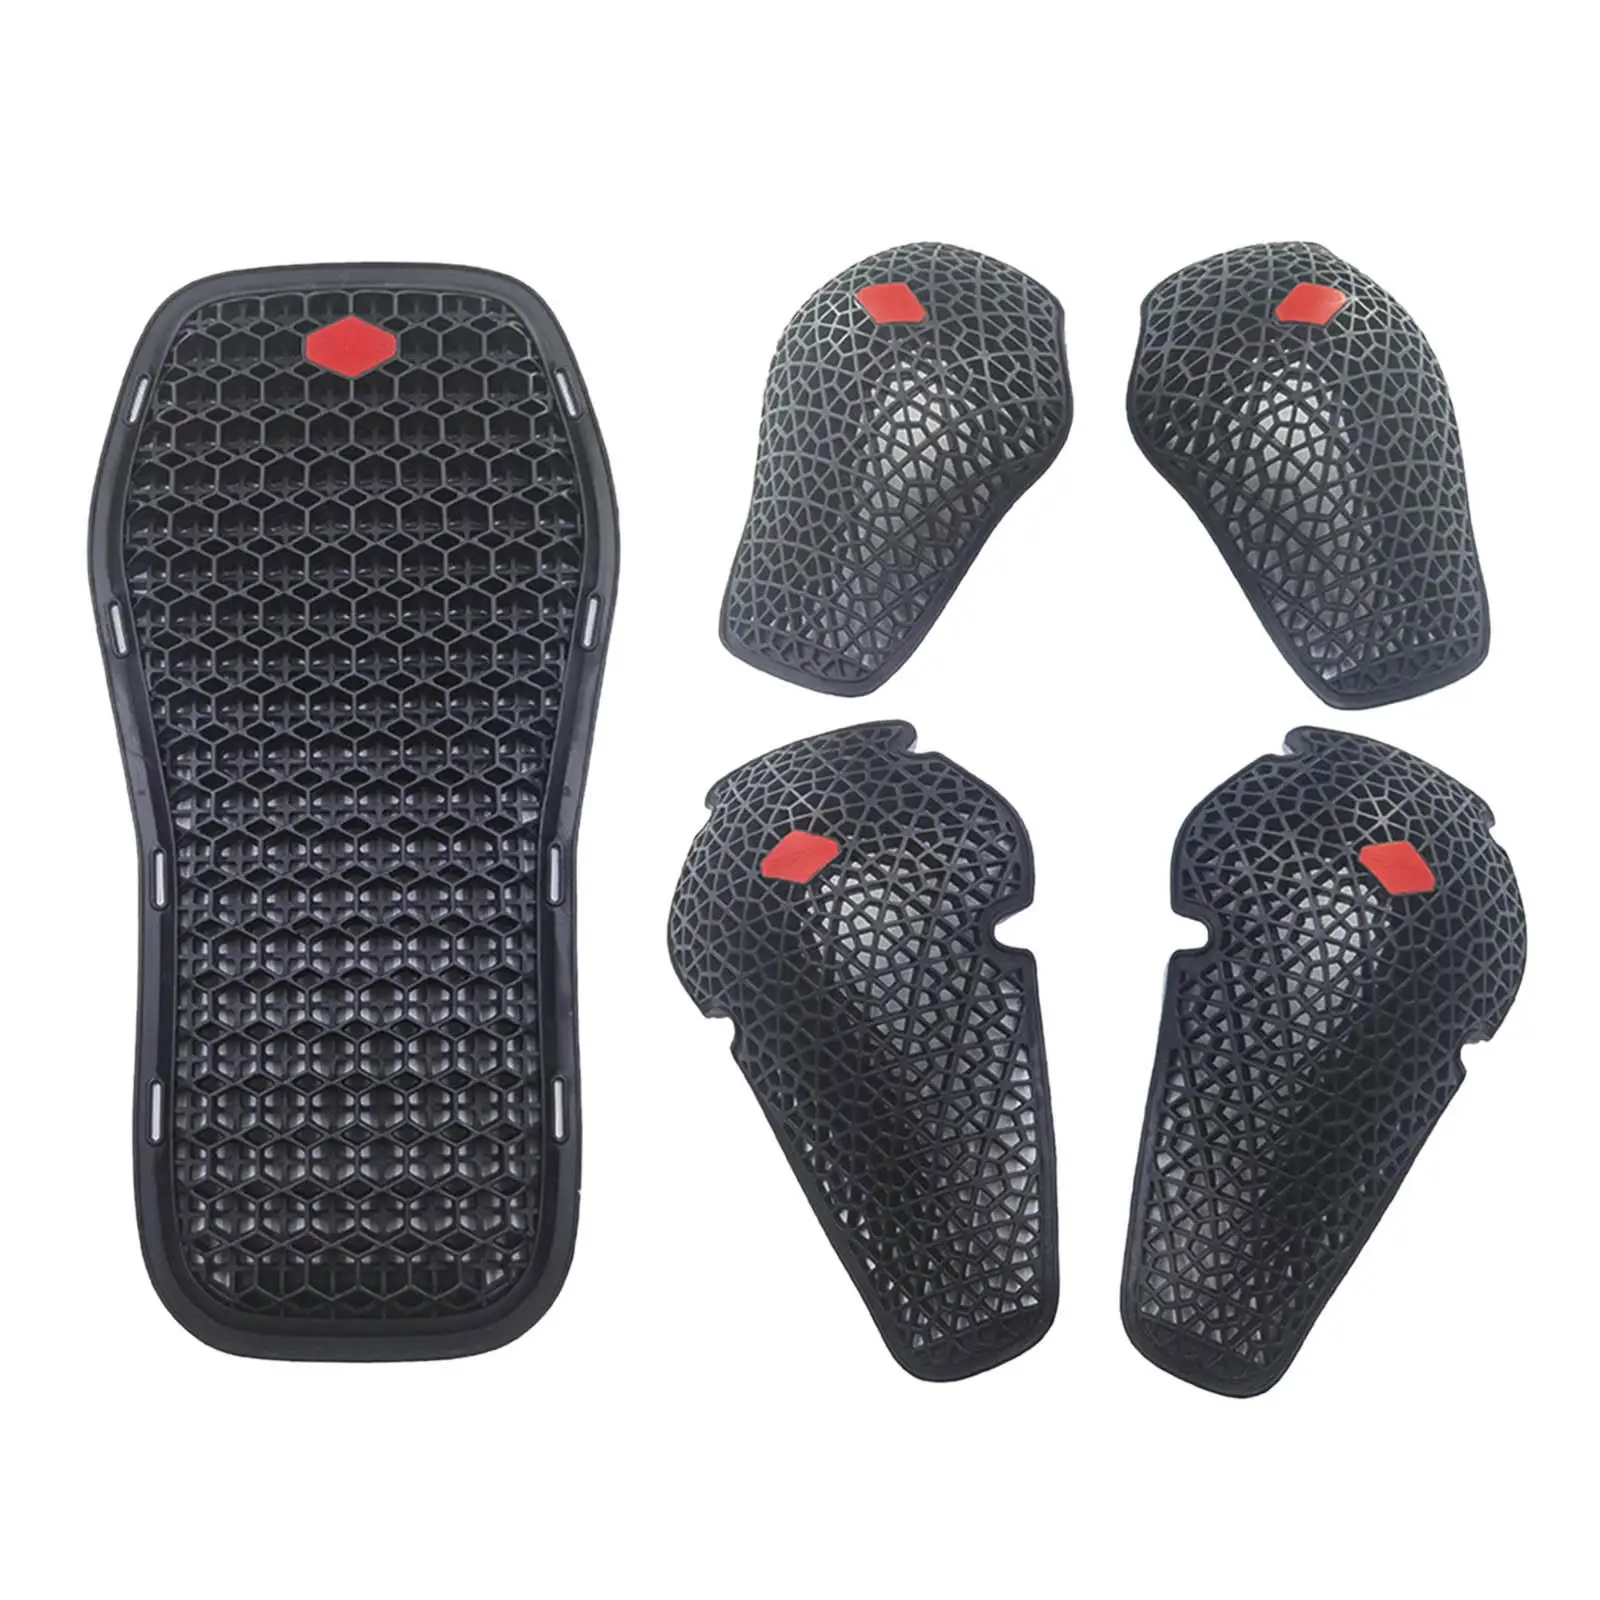 5x TPE Motorcycle Armor Protector Portable Jacket Inserts for Riding Cycling Protection Inserts Adult Motorcycle Equipment